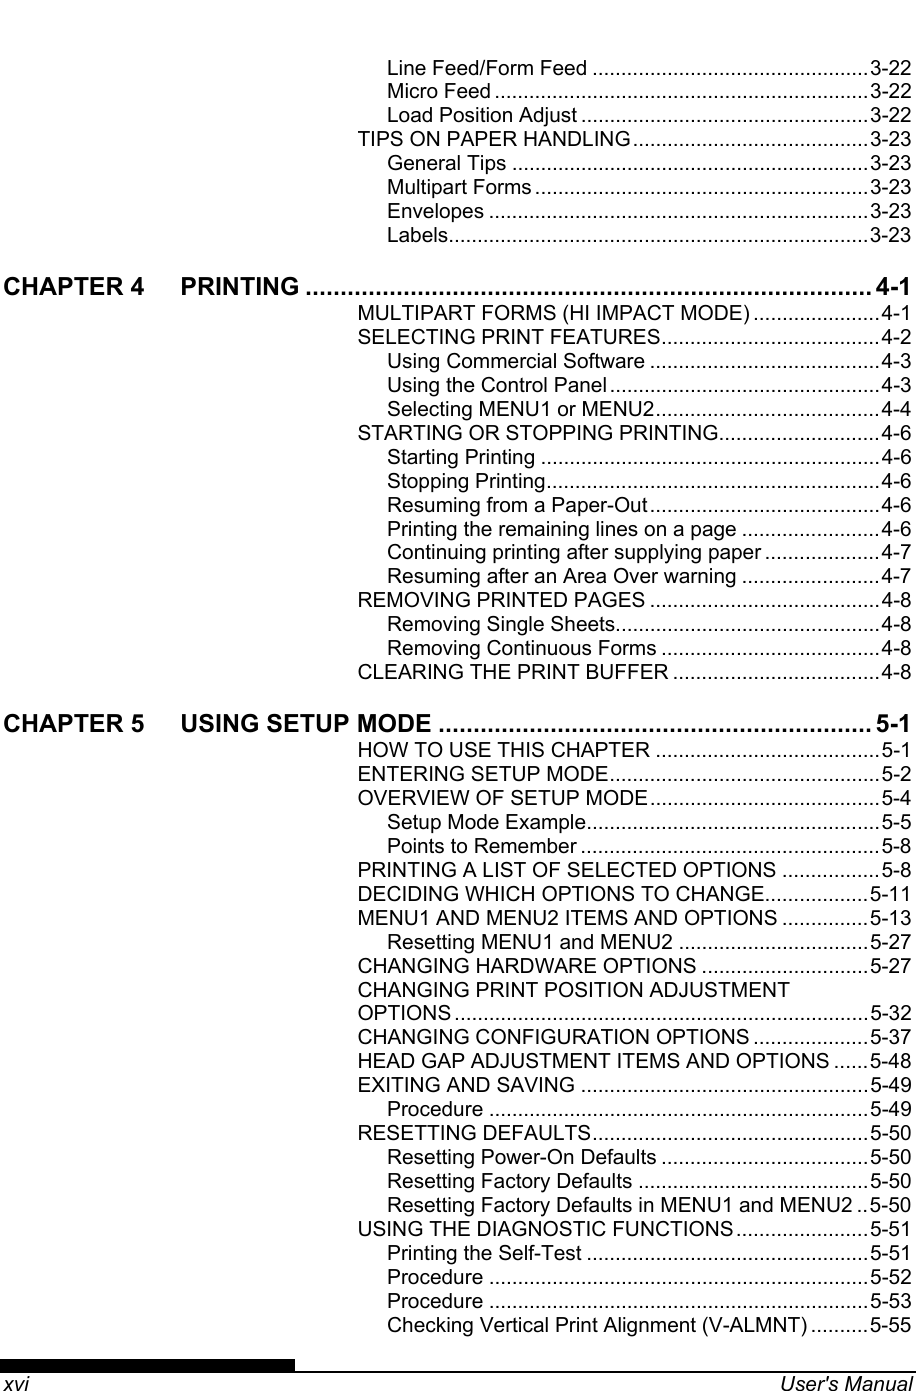    xvi  User&apos;s Manual Line Feed/Form Feed ................................................3-22 Micro Feed .................................................................3-22 Load Position Adjust ..................................................3-22 TIPS ON PAPER HANDLING.........................................3-23 General Tips ..............................................................3-23 Multipart Forms ..........................................................3-23 Envelopes ..................................................................3-23 Labels.........................................................................3-23 CHAPTER 4 PRINTING ................................................................................. 4-1 MULTIPART FORMS (HI IMPACT MODE) ......................4-1 SELECTING PRINT FEATURES......................................4-2 Using Commercial Software ........................................4-3 Using the Control Panel...............................................4-3 Selecting MENU1 or MENU2.......................................4-4 STARTING OR STOPPING PRINTING............................4-6 Starting Printing ...........................................................4-6 Stopping Printing..........................................................4-6 Resuming from a Paper-Out........................................4-6 Printing the remaining lines on a page ........................4-6 Continuing printing after supplying paper ....................4-7 Resuming after an Area Over warning ........................4-7 REMOVING PRINTED PAGES ........................................4-8 Removing Single Sheets..............................................4-8 Removing Continuous Forms ......................................4-8 CLEARING THE PRINT BUFFER ....................................4-8 CHAPTER 5 USING SETUP MODE .............................................................. 5-1 HOW TO USE THIS CHAPTER .......................................5-1 ENTERING SETUP MODE...............................................5-2 OVERVIEW OF SETUP MODE........................................5-4 Setup Mode Example...................................................5-5 Points to Remember ....................................................5-8 PRINTING A LIST OF SELECTED OPTIONS .................5-8 DECIDING WHICH OPTIONS TO CHANGE..................5-11 MENU1 AND MENU2 ITEMS AND OPTIONS ...............5-13 Resetting MENU1 and MENU2 .................................5-27 CHANGING HARDWARE OPTIONS .............................5-27 CHANGING PRINT POSITION ADJUSTMENT OPTIONS ........................................................................5-32 CHANGING CONFIGURATION OPTIONS ....................5-37 HEAD GAP ADJUSTMENT ITEMS AND OPTIONS ......5-48 EXITING AND SAVING ..................................................5-49 Procedure ..................................................................5-49 RESETTING DEFAULTS................................................5-50 Resetting Power-On Defaults ....................................5-50 Resetting Factory Defaults ........................................5-50 Resetting Factory Defaults in MENU1 and MENU2 ..5-50 USING THE DIAGNOSTIC FUNCTIONS.......................5-51 Printing the Self-Test .................................................5-51 Procedure ..................................................................5-52 Procedure ..................................................................5-53 Checking Vertical Print Alignment (V-ALMNT) ..........5-55 